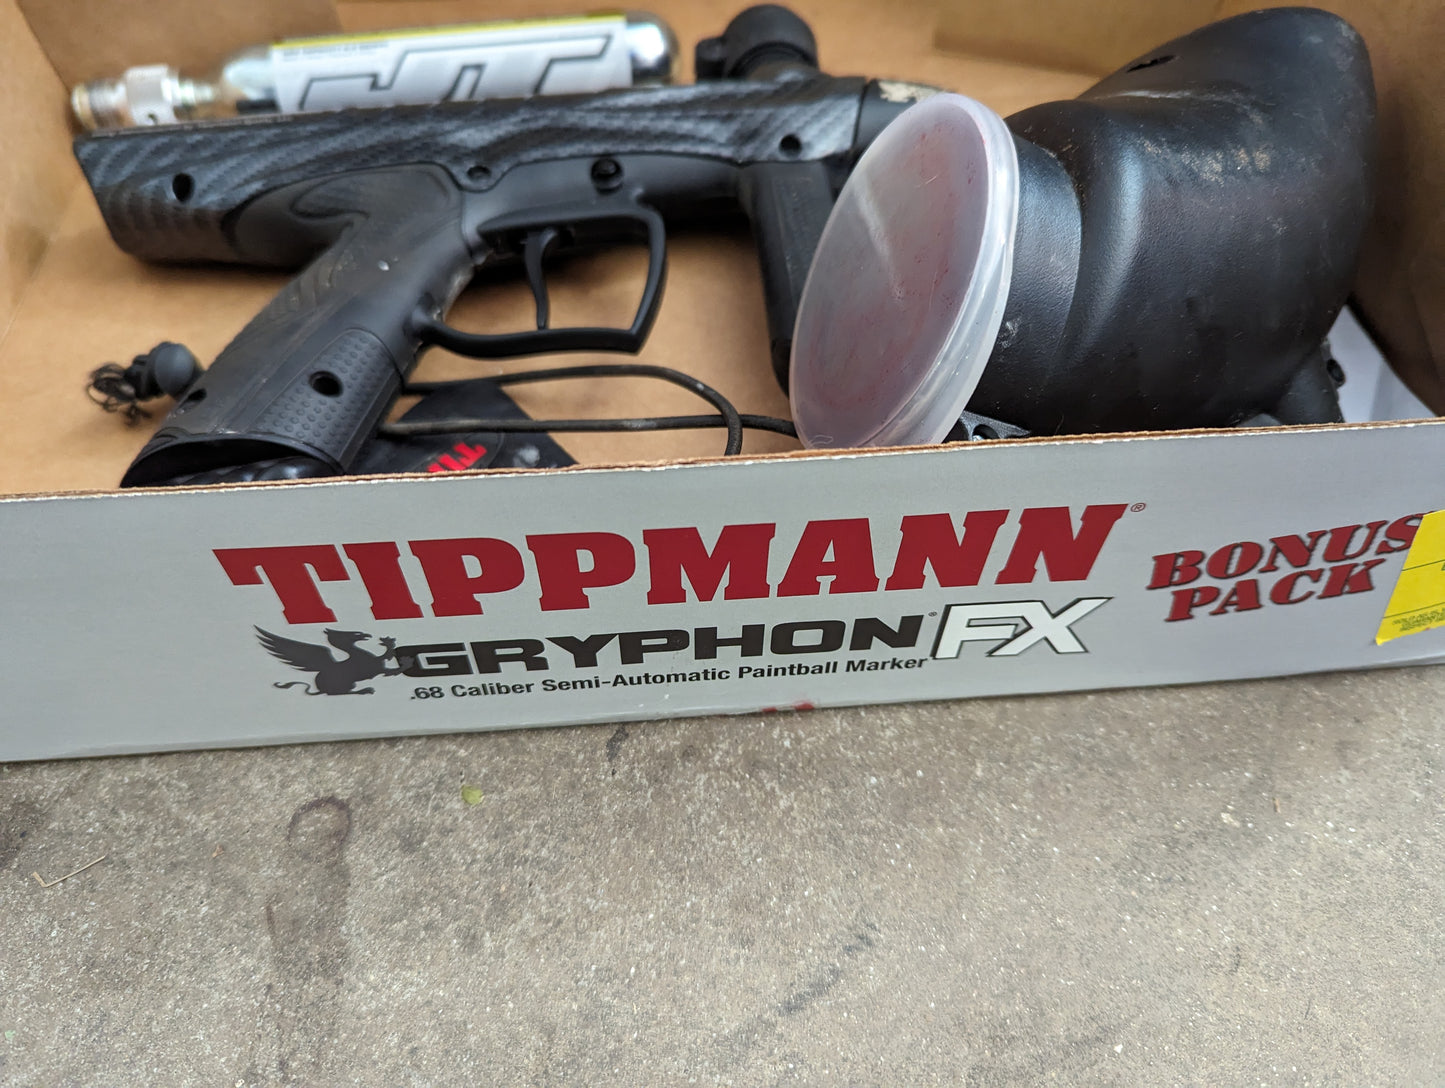 Tippmann Gryphon FX Paintball Marker with Extra's - USED